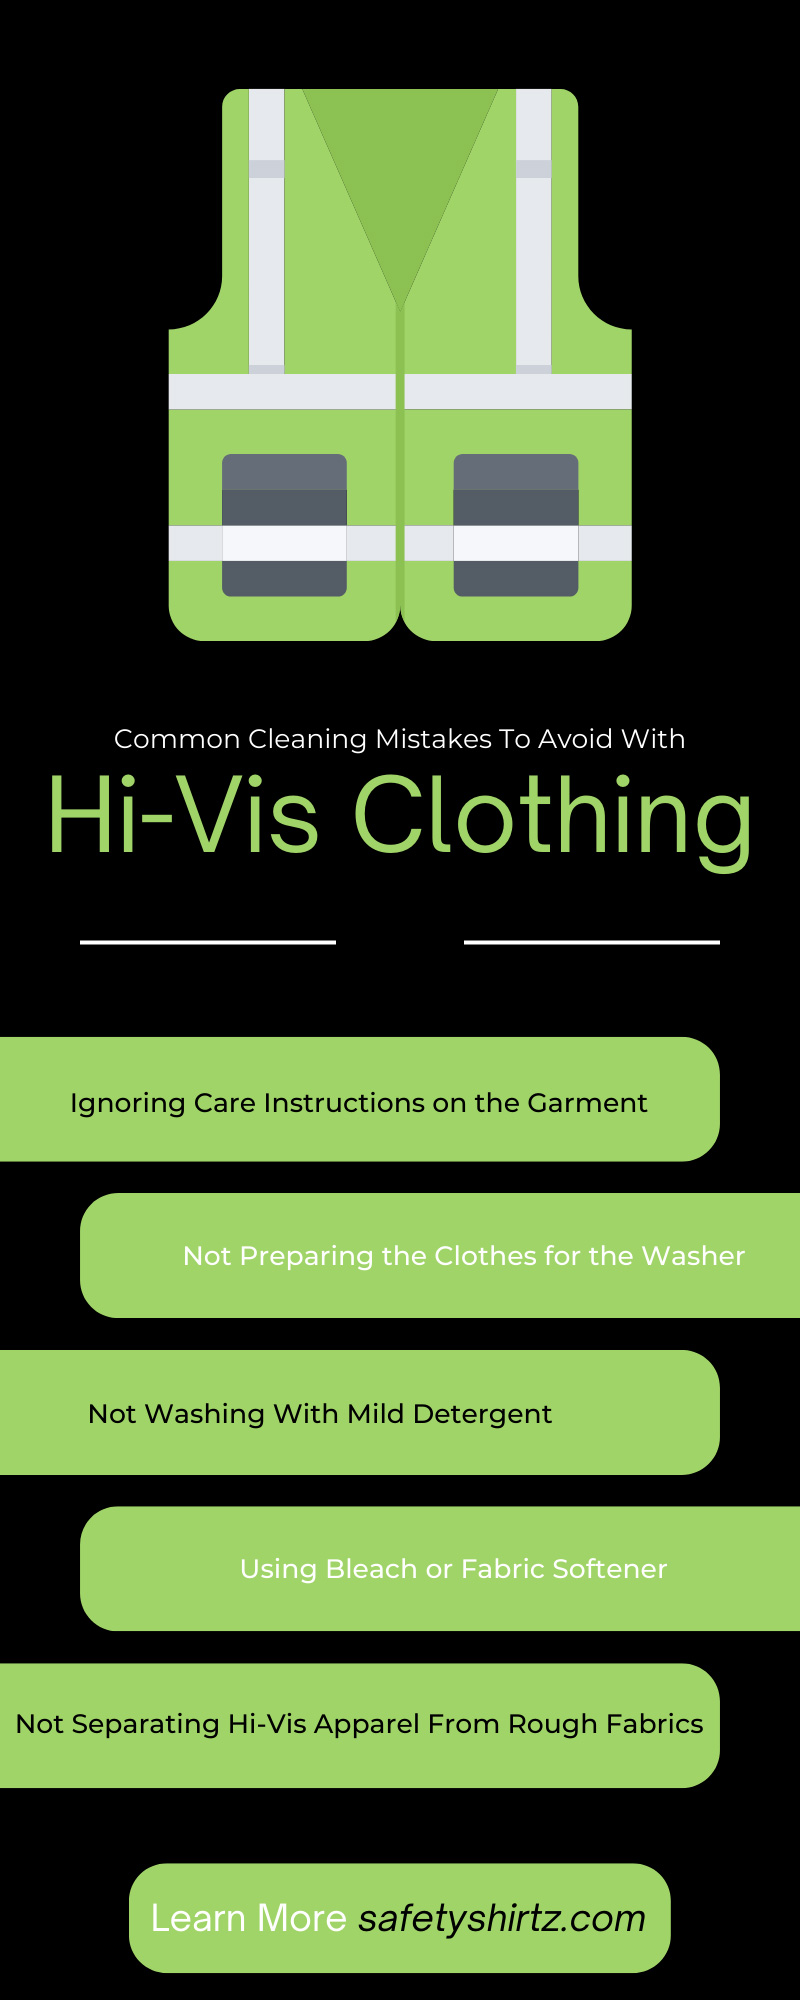 Common Cleaning Mistakes To Avoid With Hi-Vis Clothing